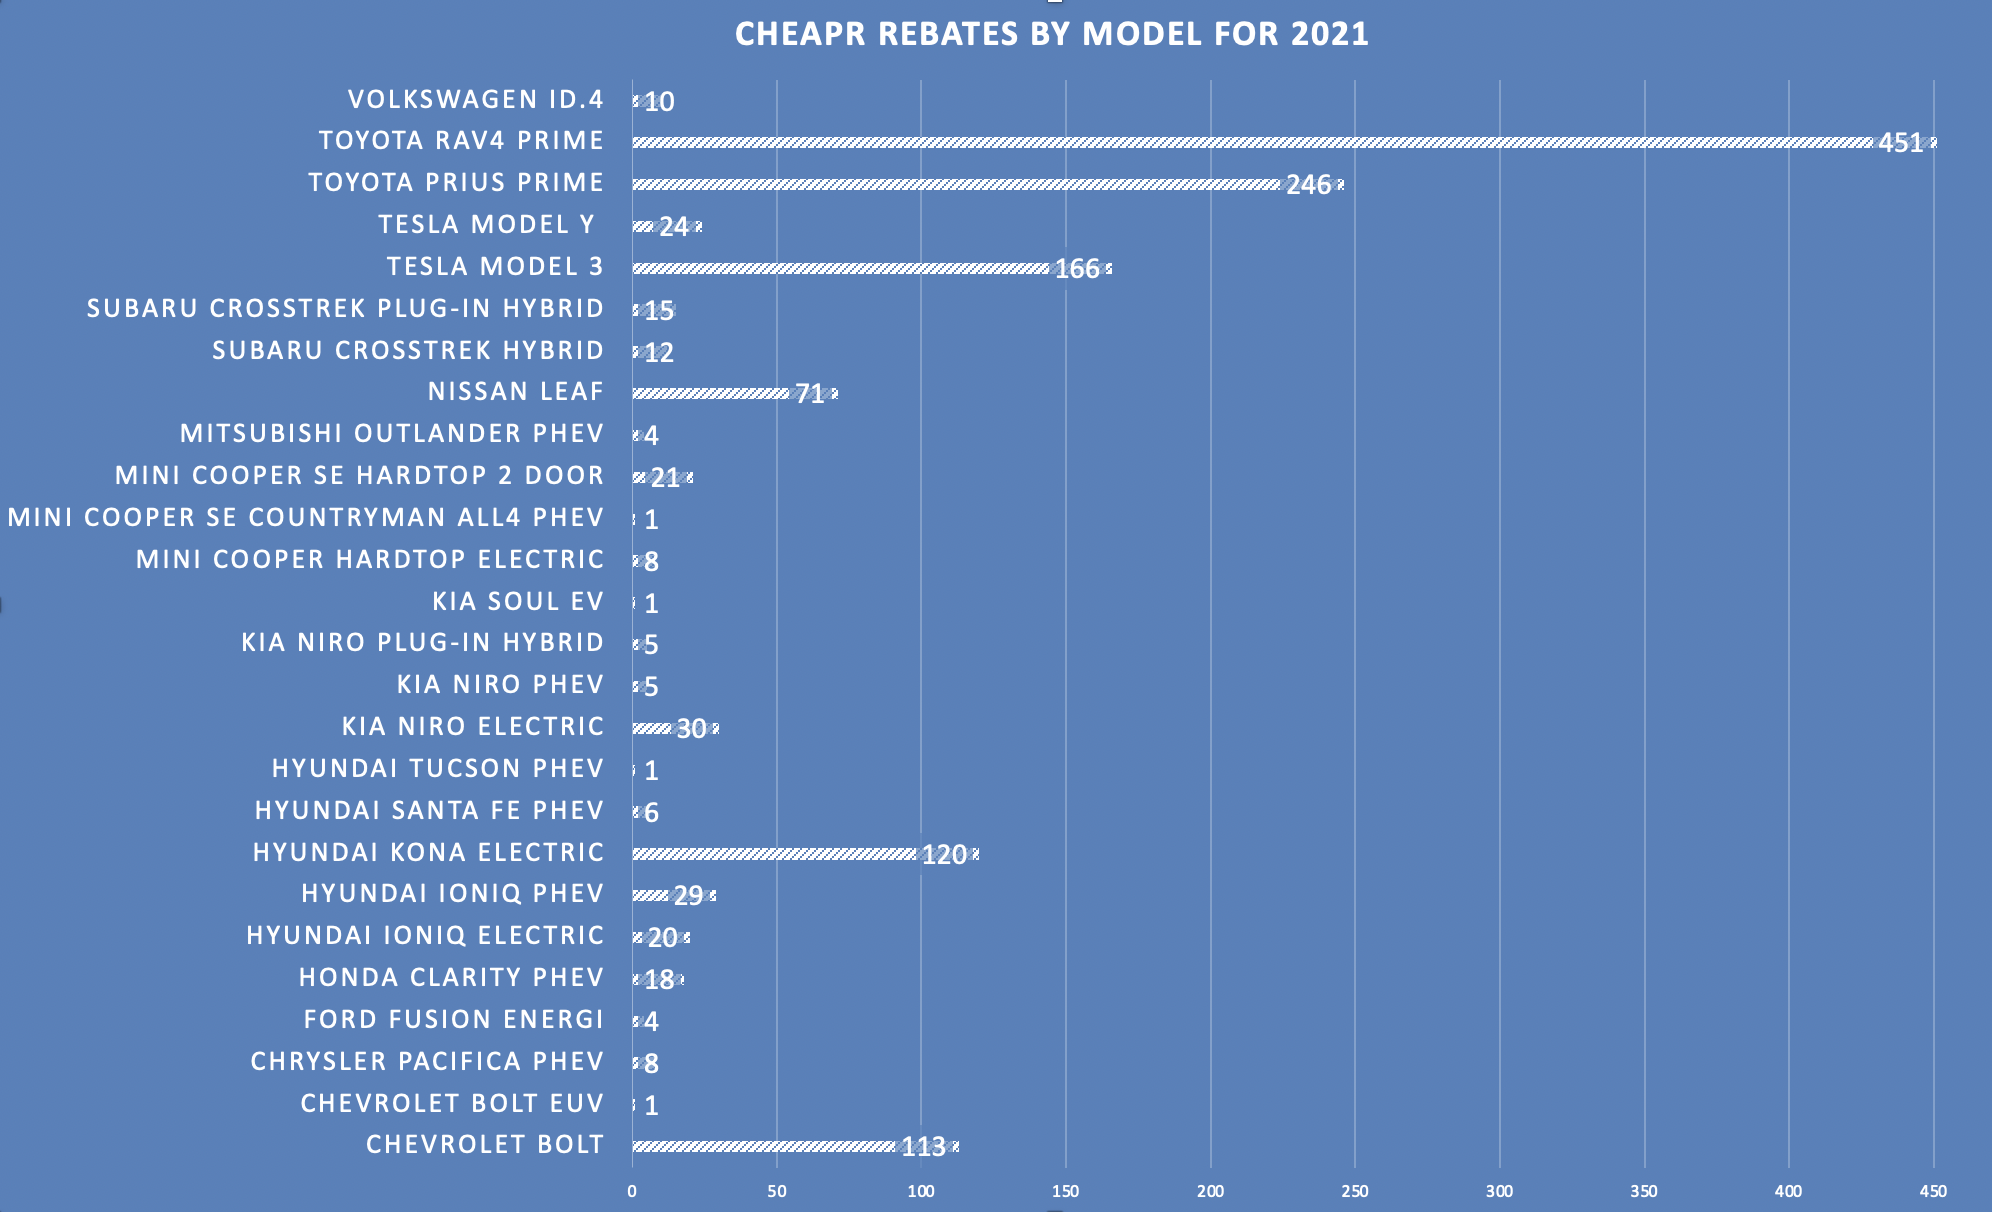 CHEAPR rebates by model for 2021 full year